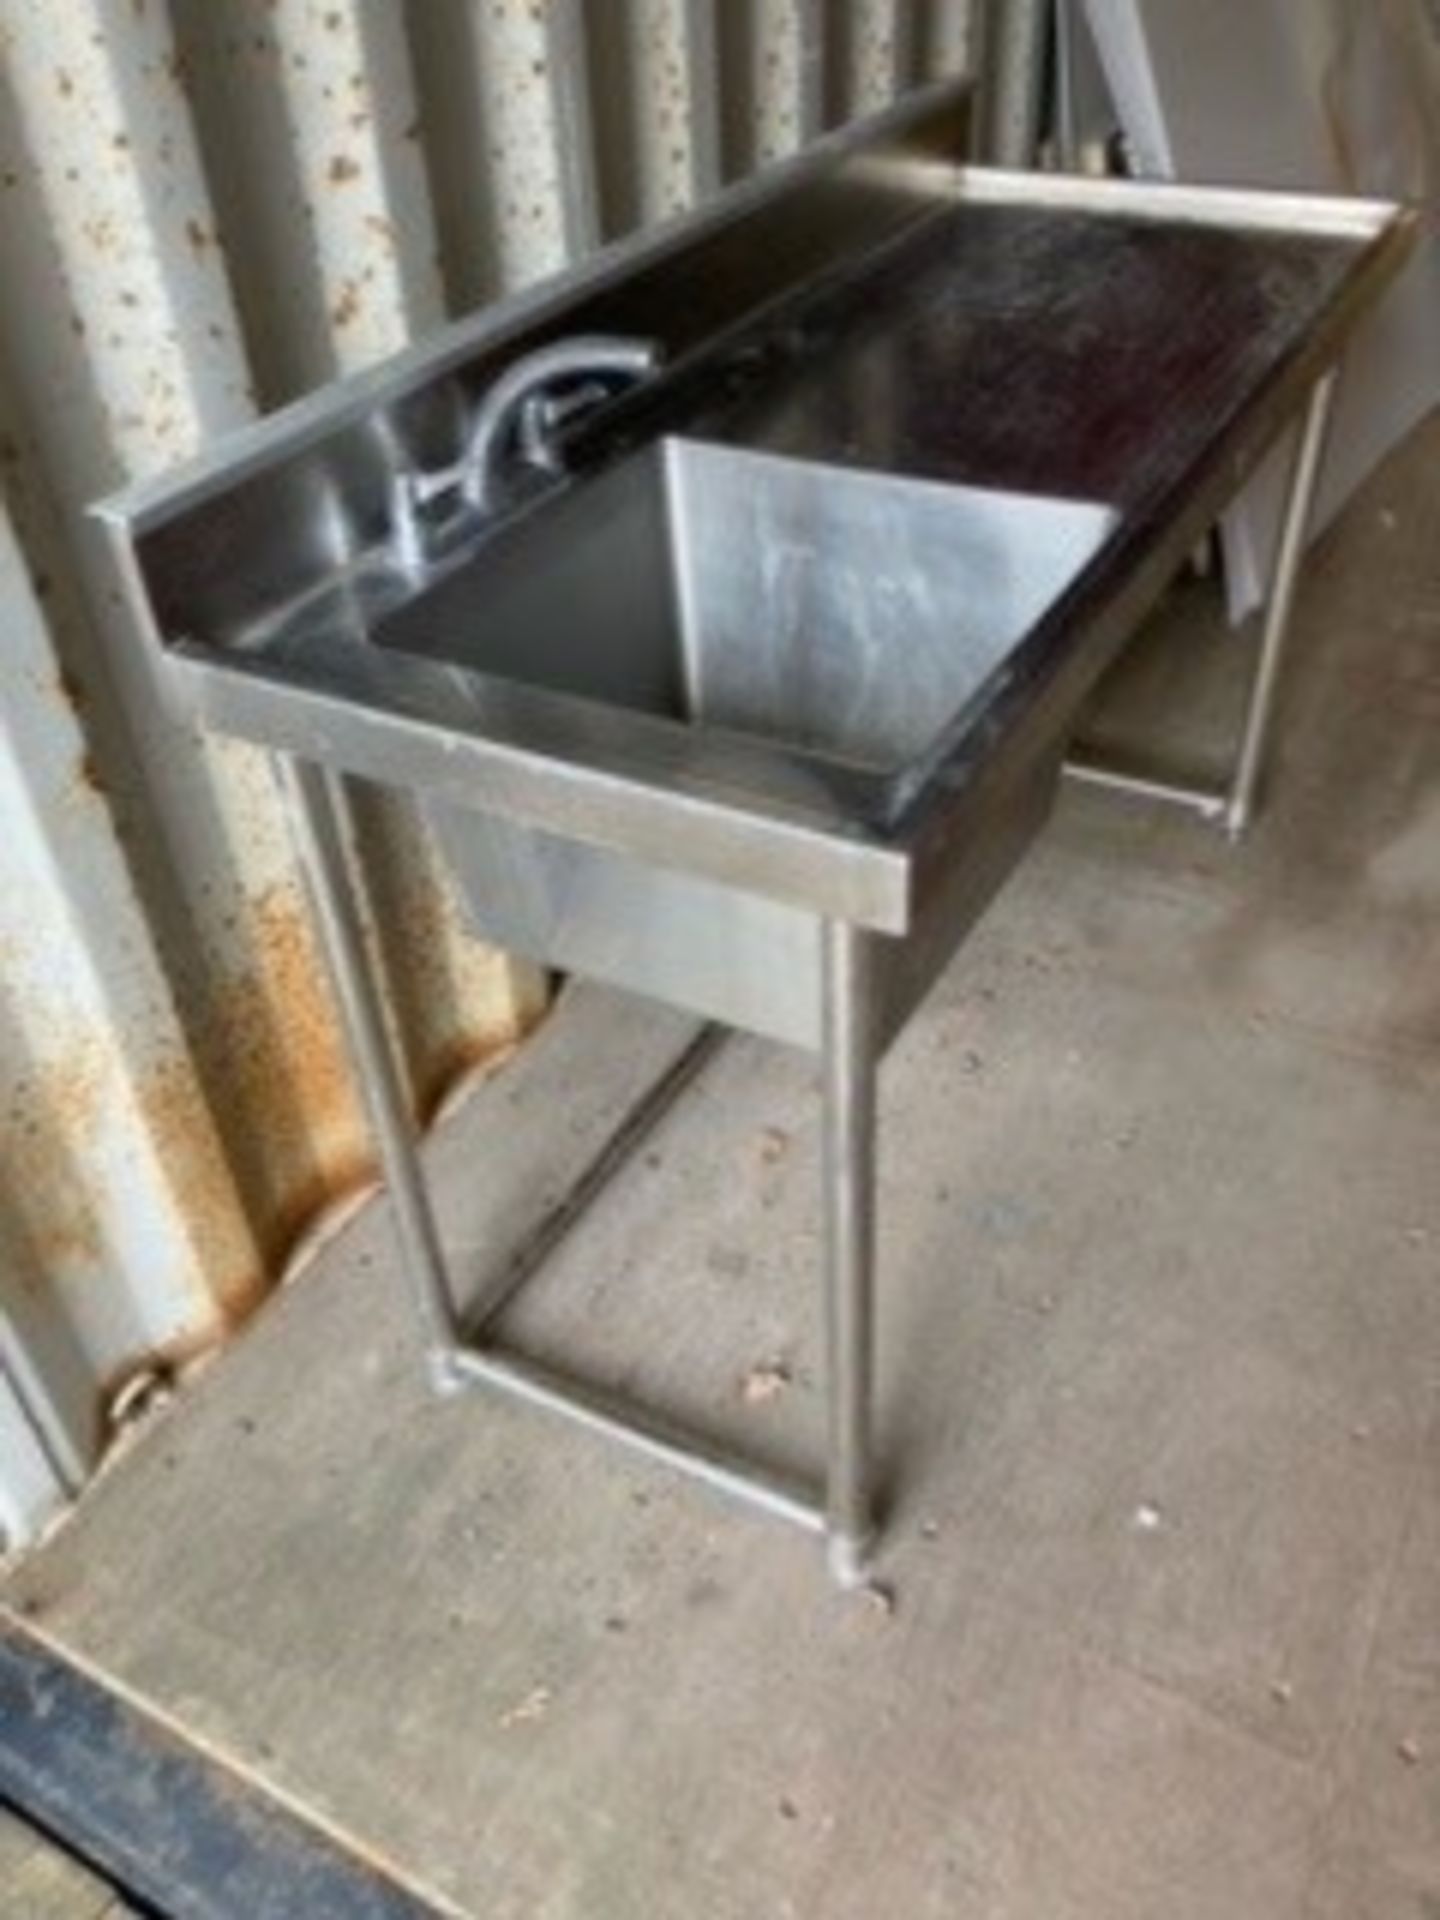 Simply Stainless Steel Preparation Table With Sink - Image 2 of 5